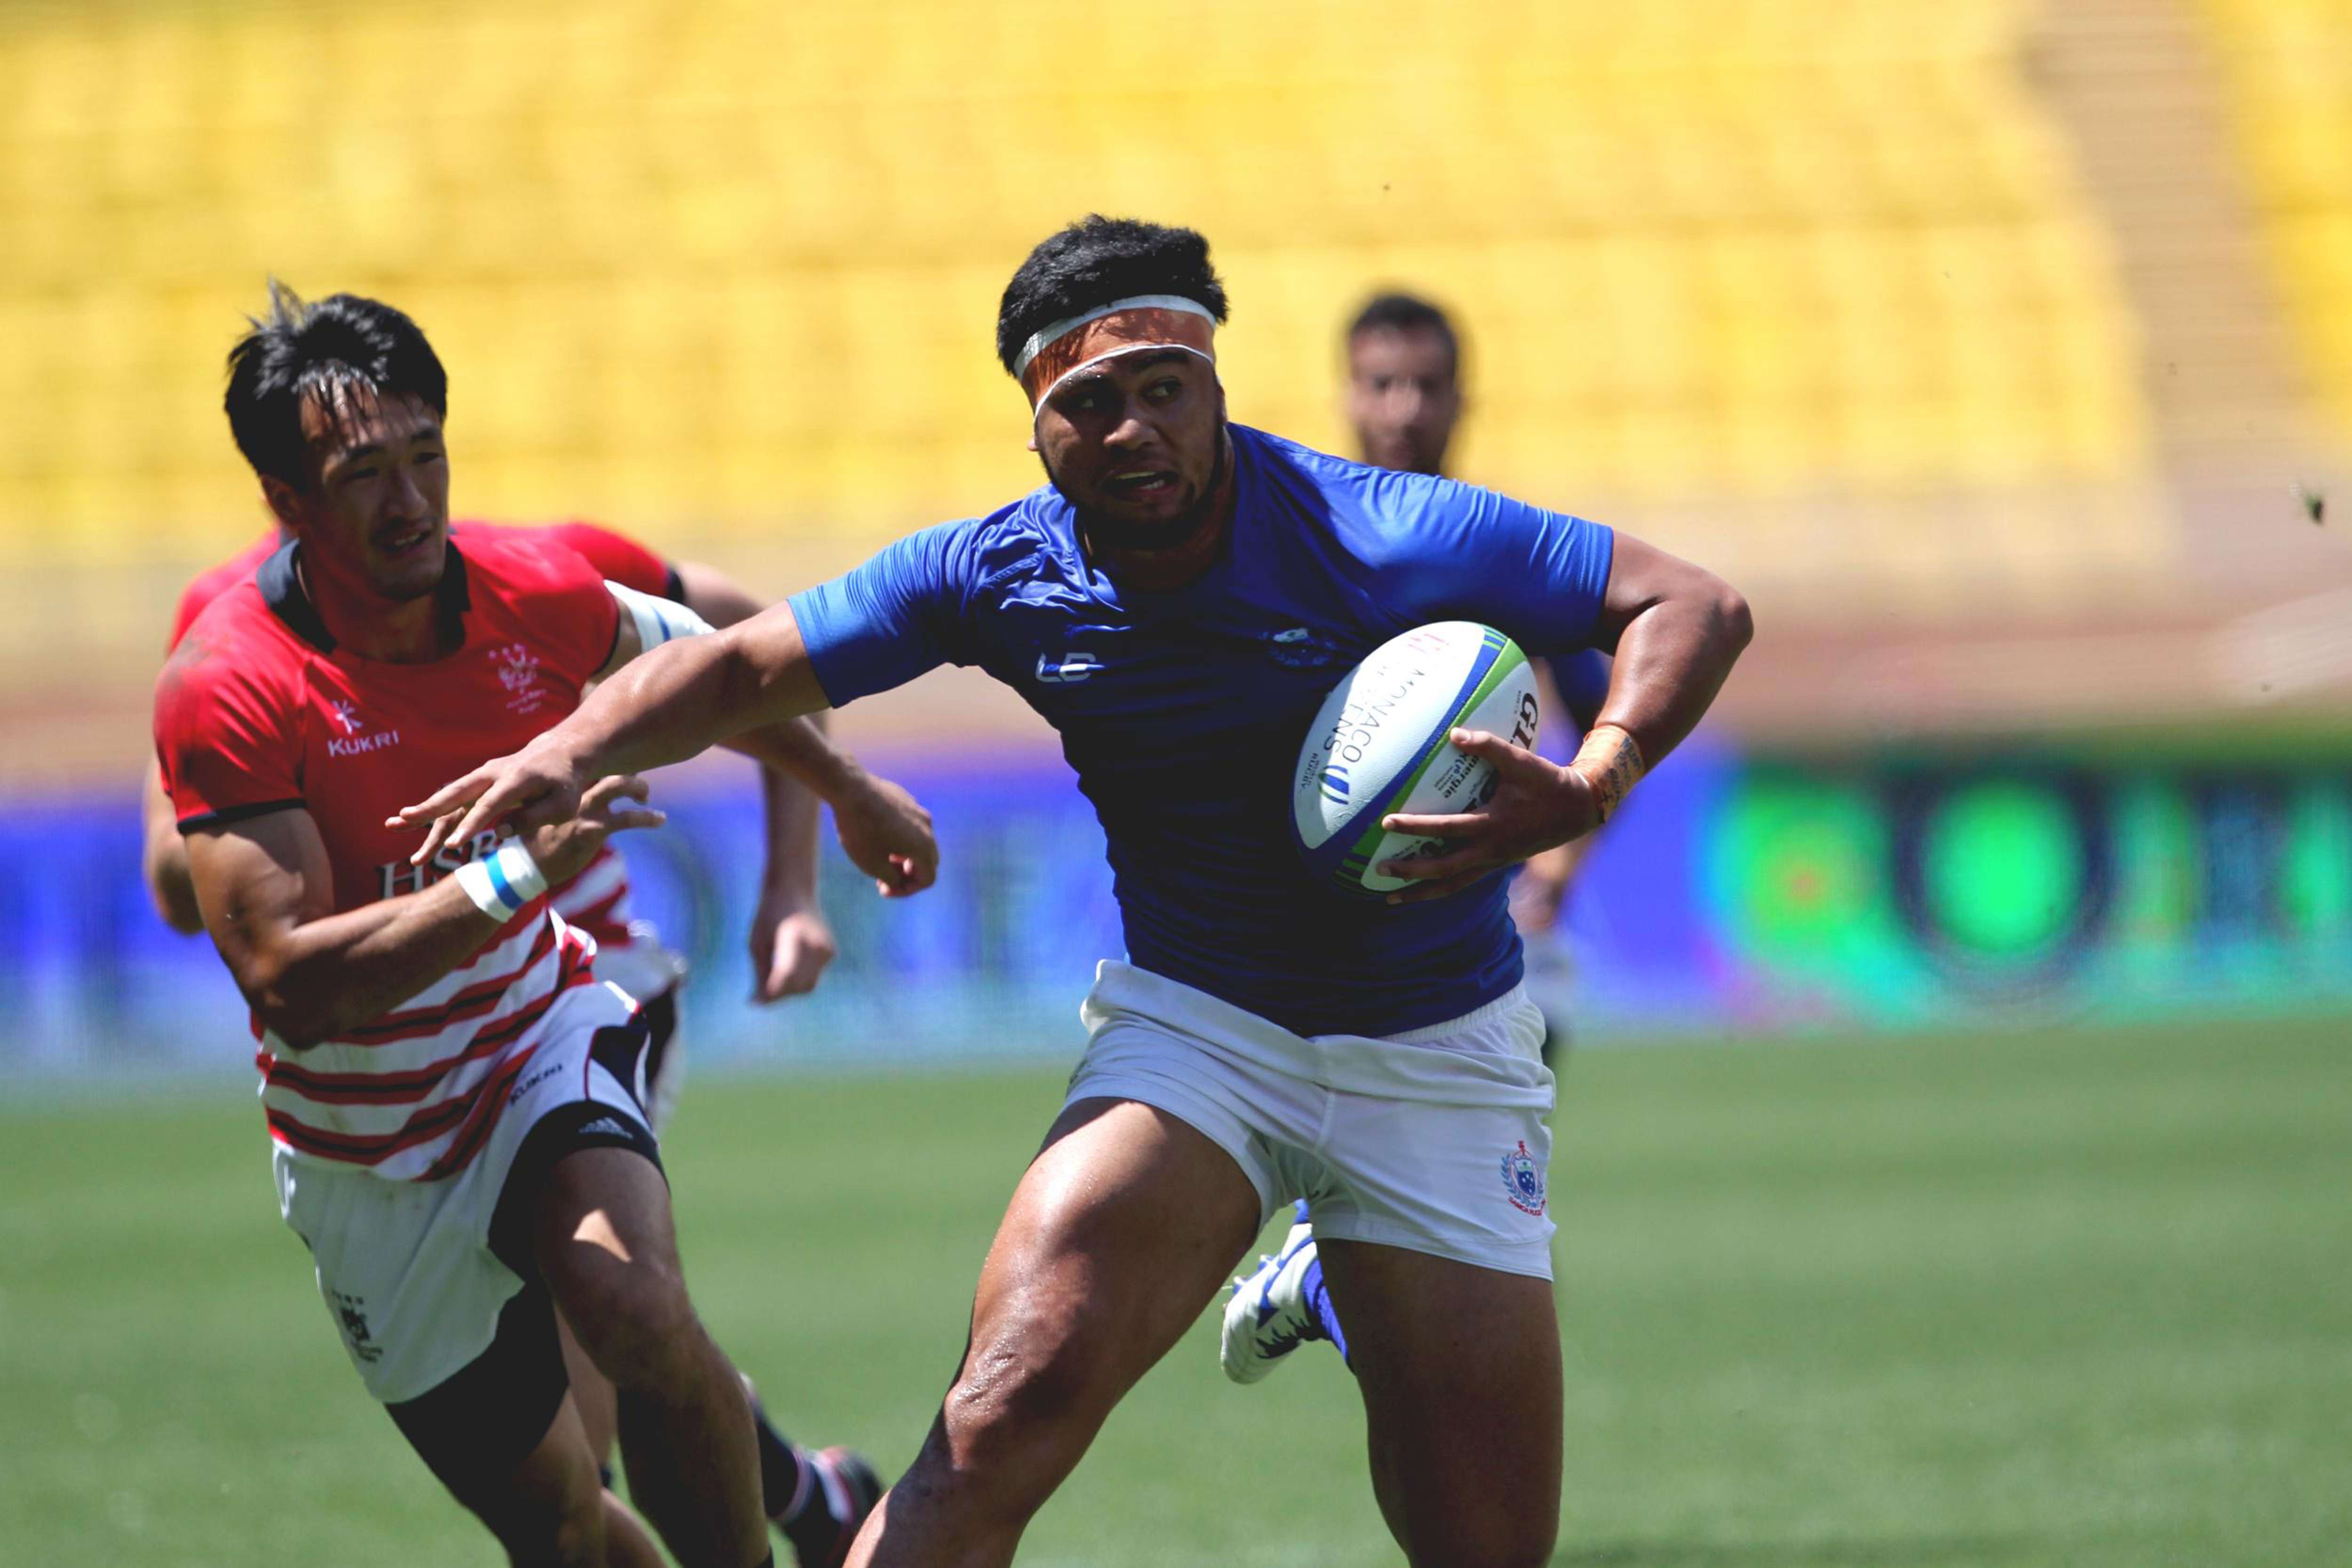 Hong Kong’s Salom Yiu Kam-shing (left) chases Belgium Tuatagaloa of Samoa during the Olympic repêchage sevens qualifier quarter-finals in Monaco on Sunday. Photos: World Rugby